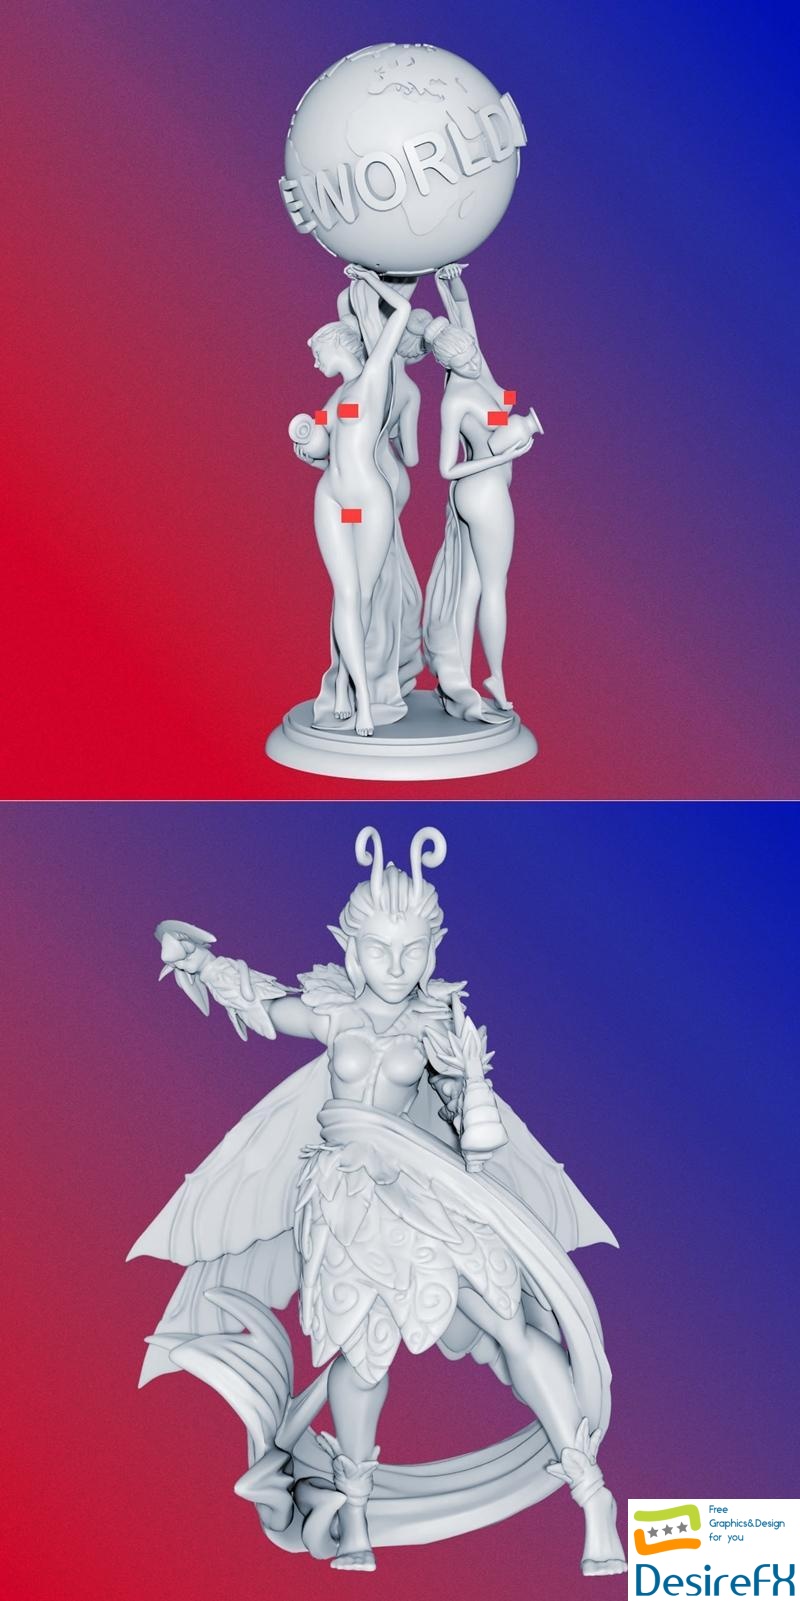 The World is Yours Statue and Xenia 3D Print